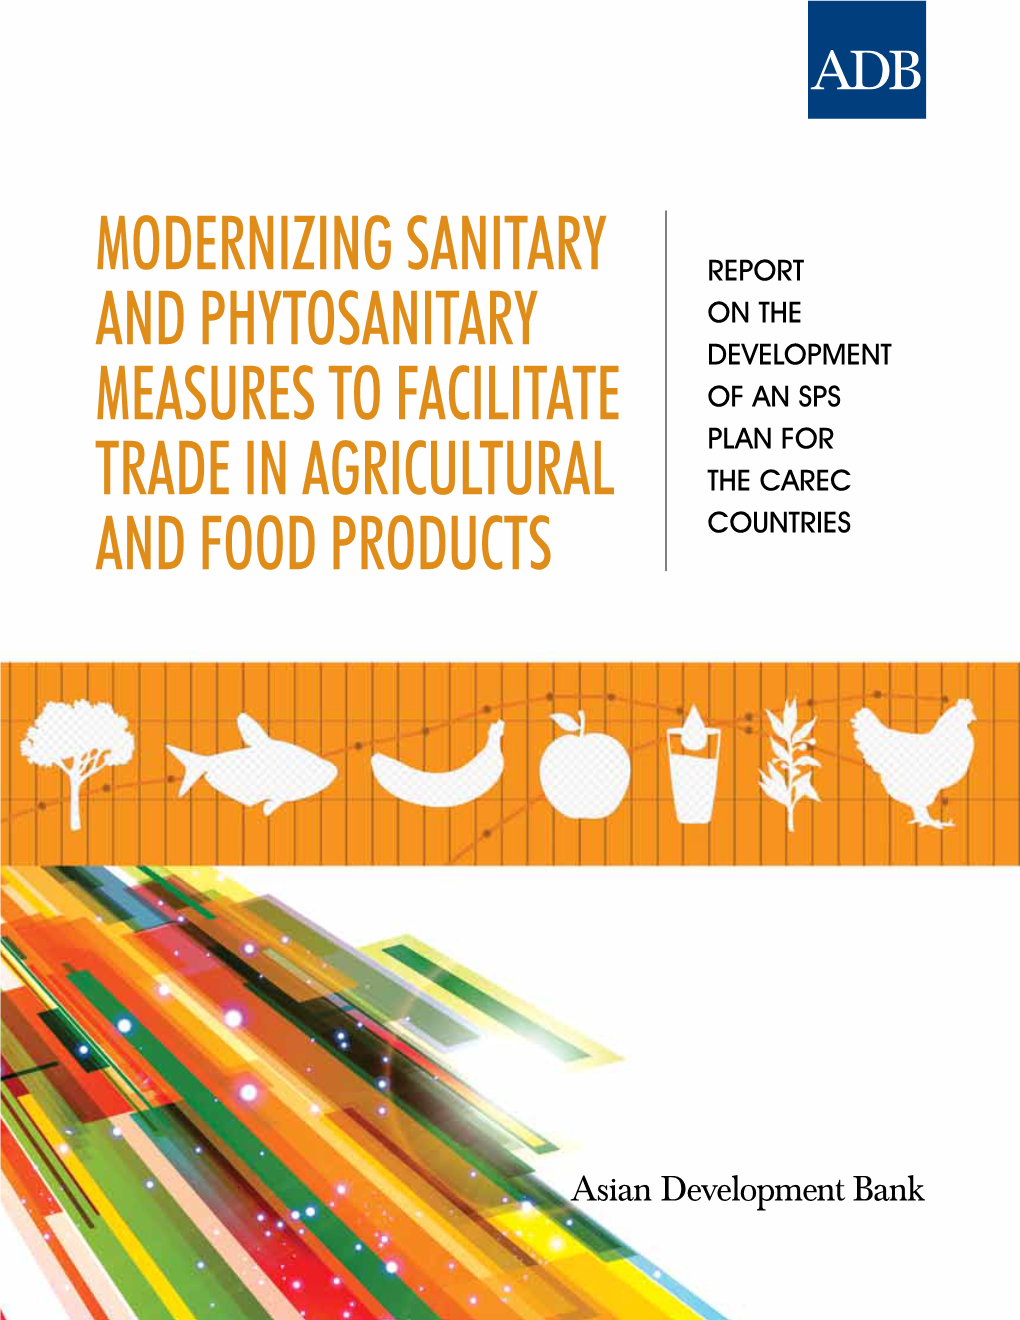 Modernizing Sanitary and Phytosanitary Measures to Facilitate Trade in Agricultural and Food Products Report on the Development of an SPS Plan for the CAREC Countries